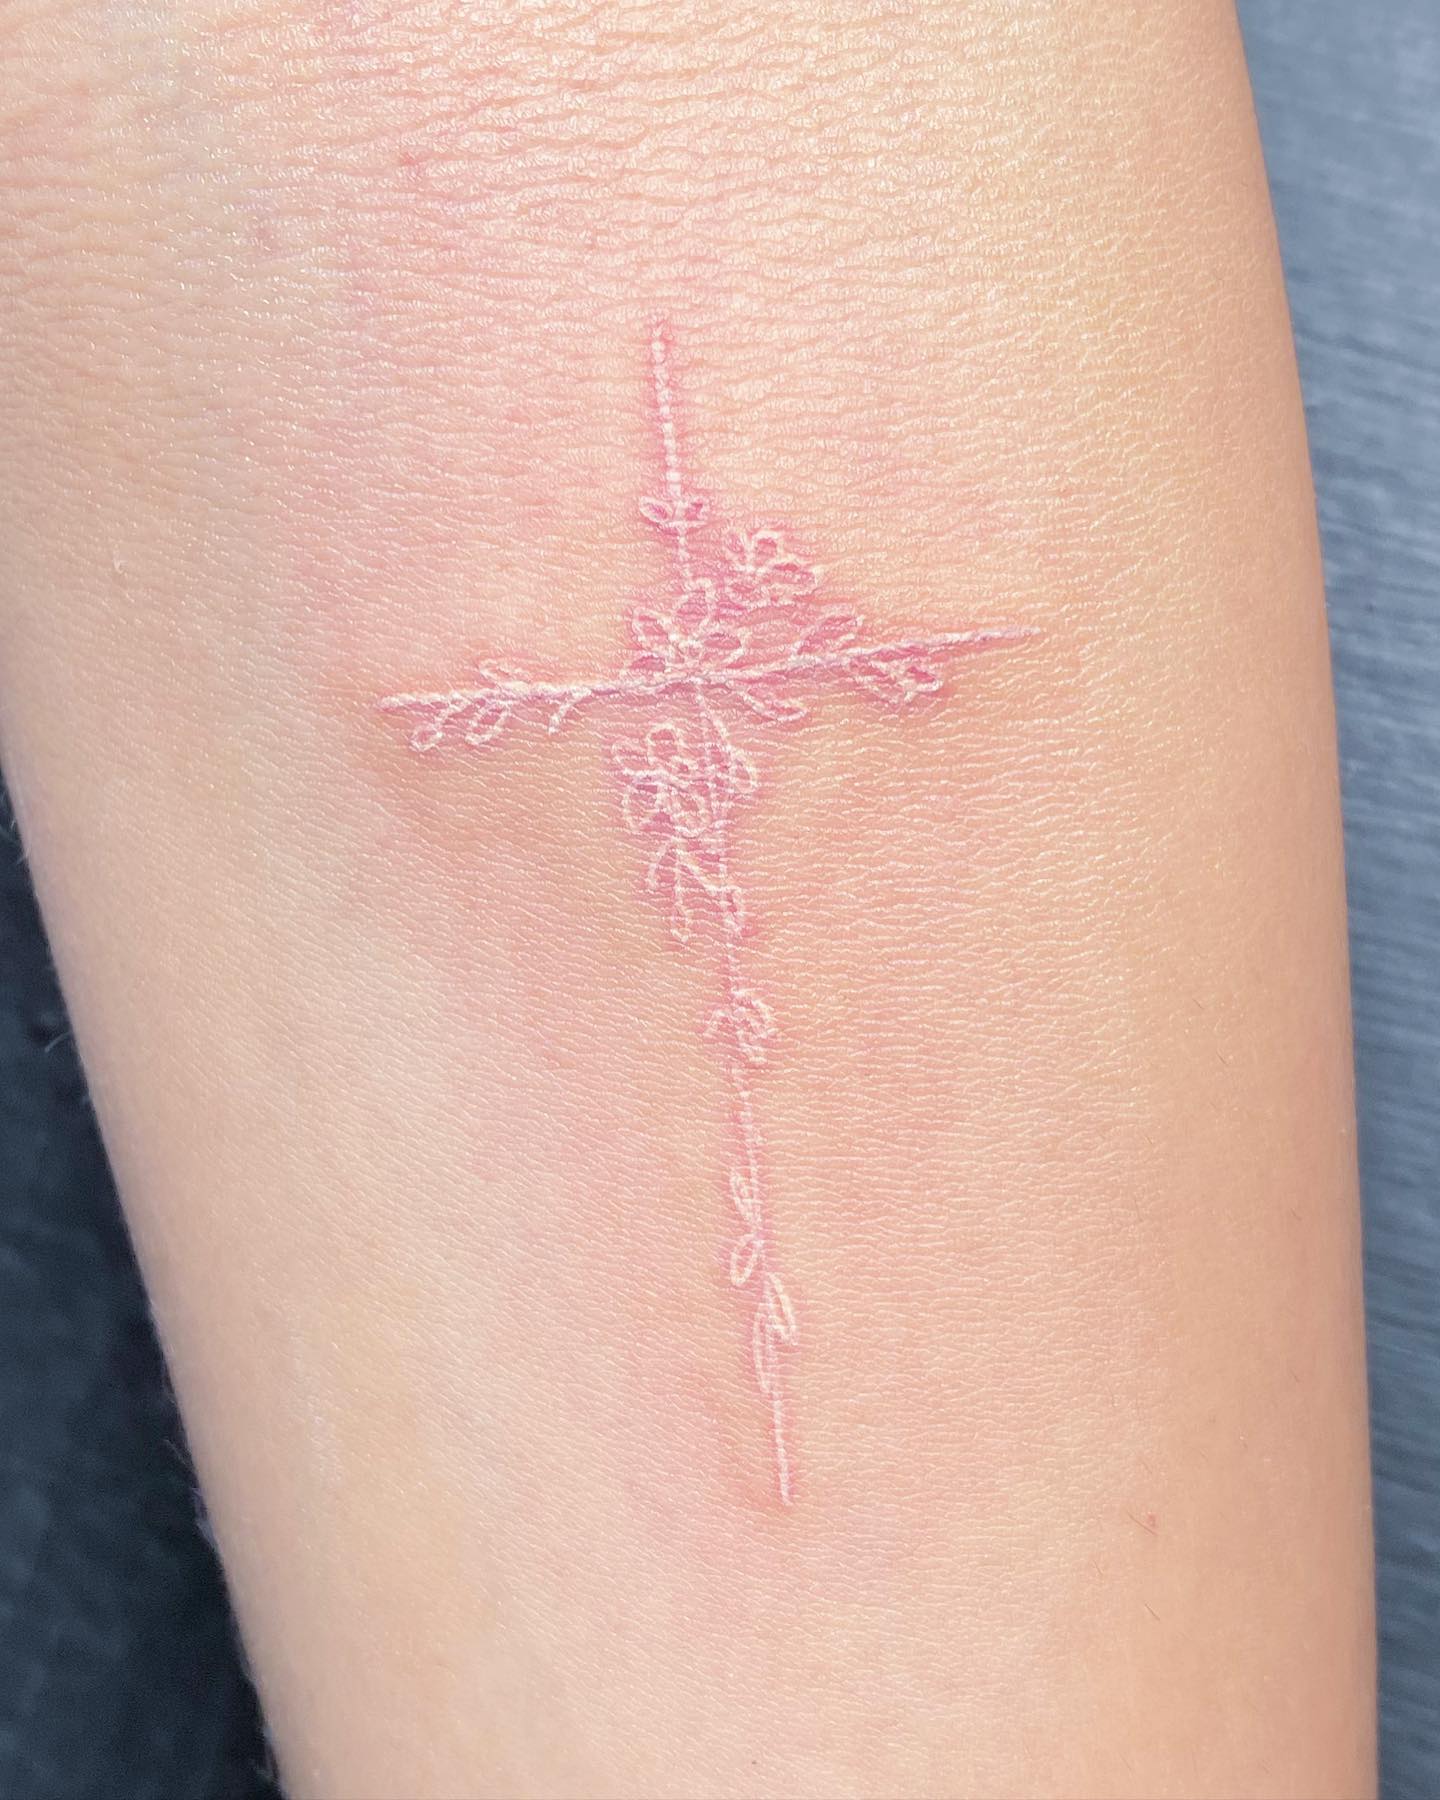 Cross tattoos are a great way to express your faith. It's a reminder that you are not alone in this world and that God is with you. Plus, white ink will symbolize your pure love.